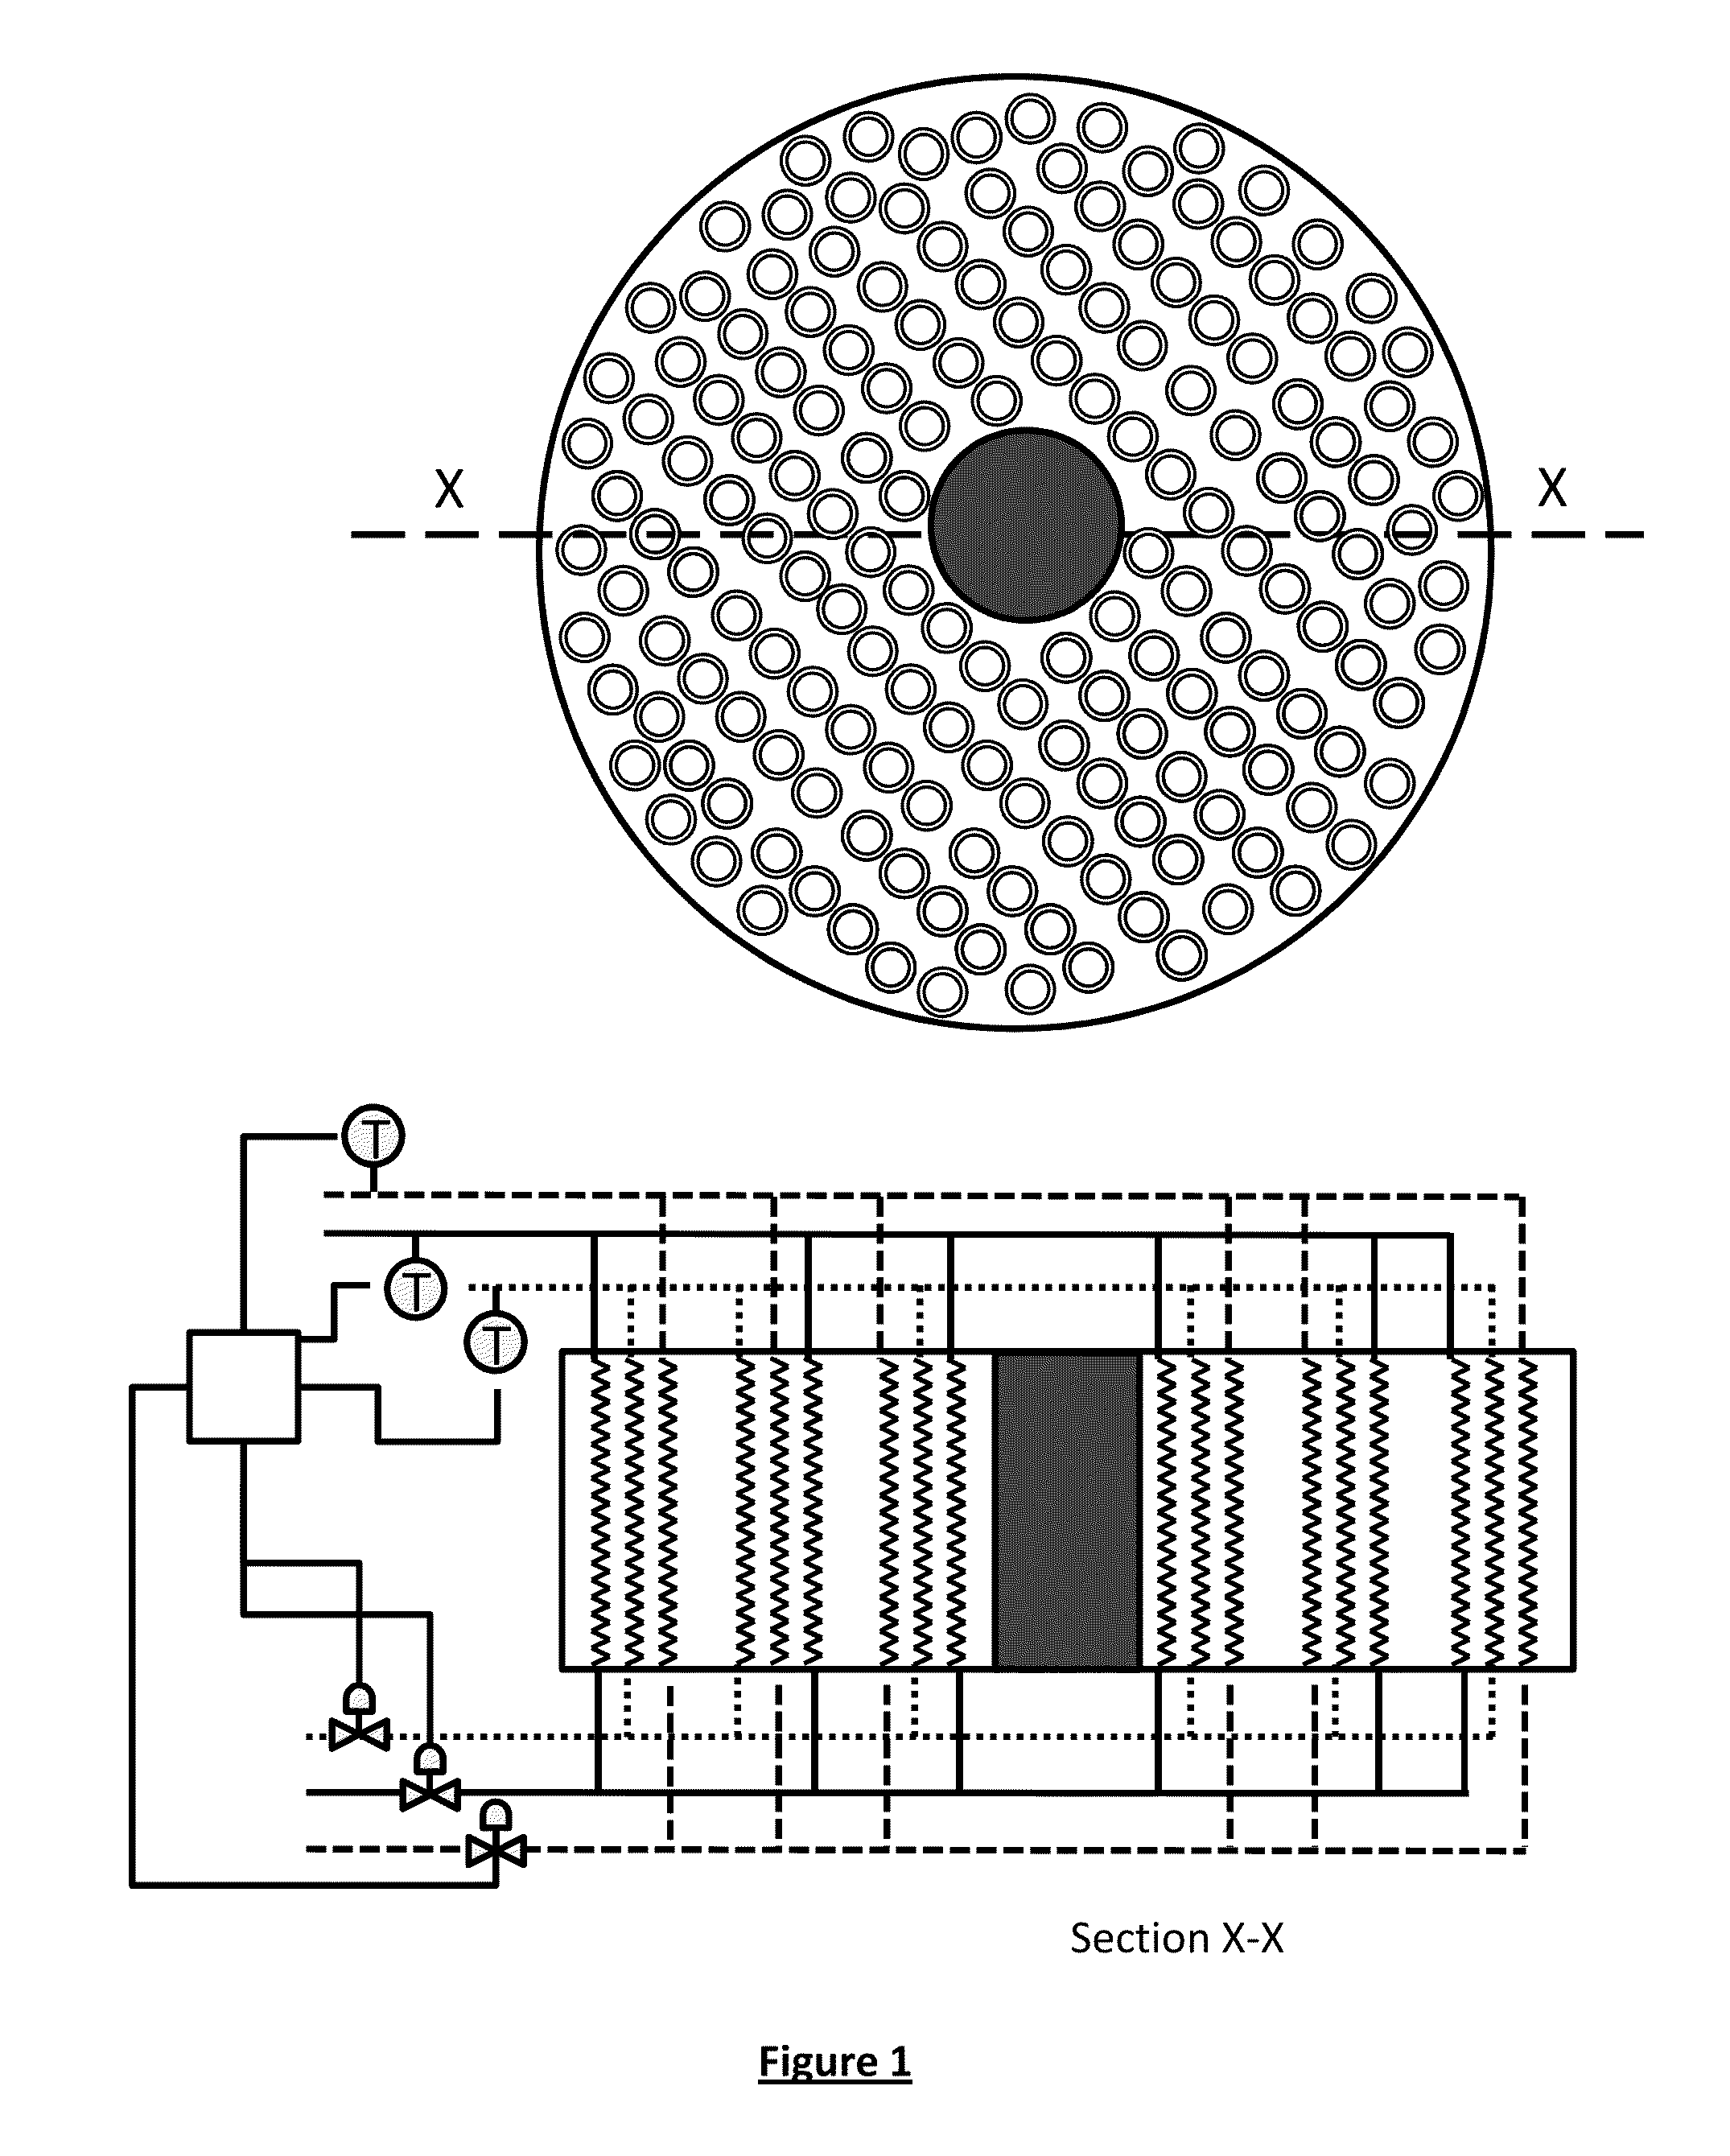 Rebalancing a main heat exchanger in a process for liquefying a tube side stream